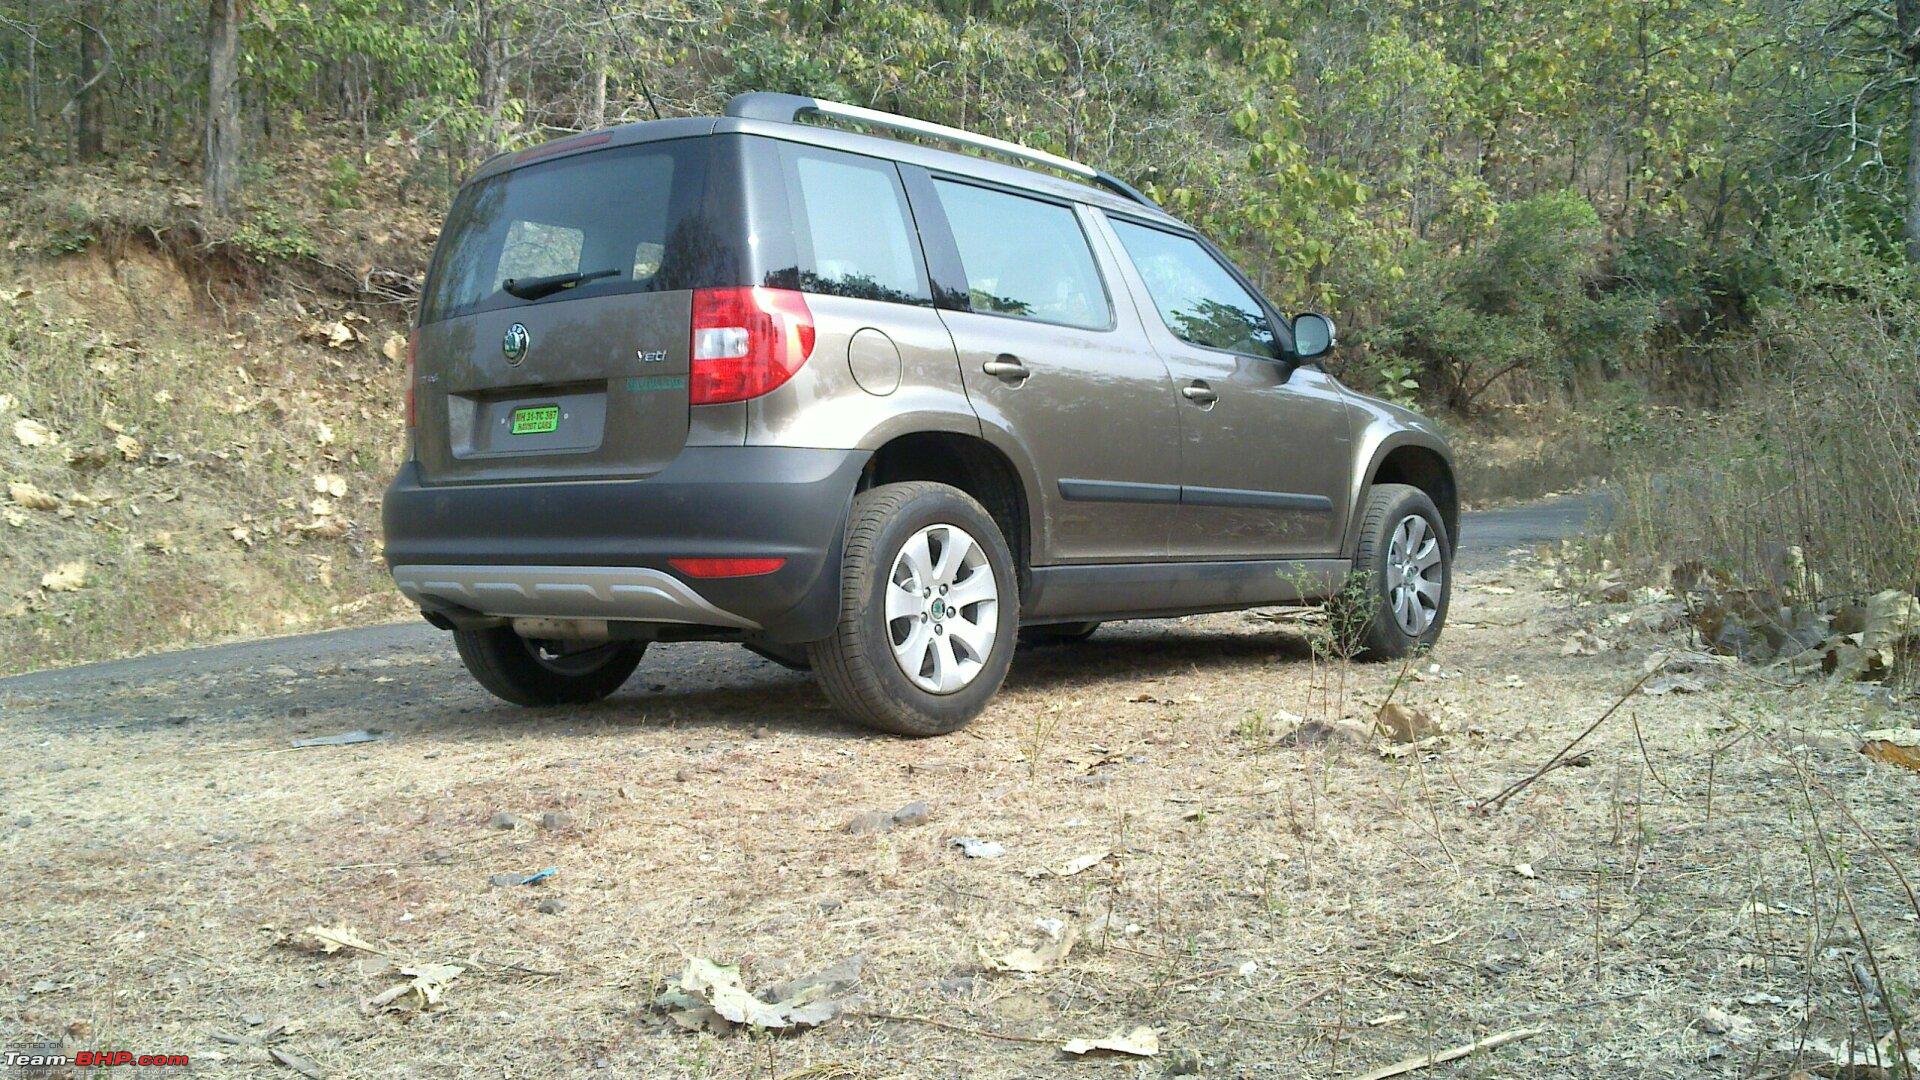 Skoda Yeti@ India (An ownership review) EDIT: Now sold! - Page 3 - Team-BHP